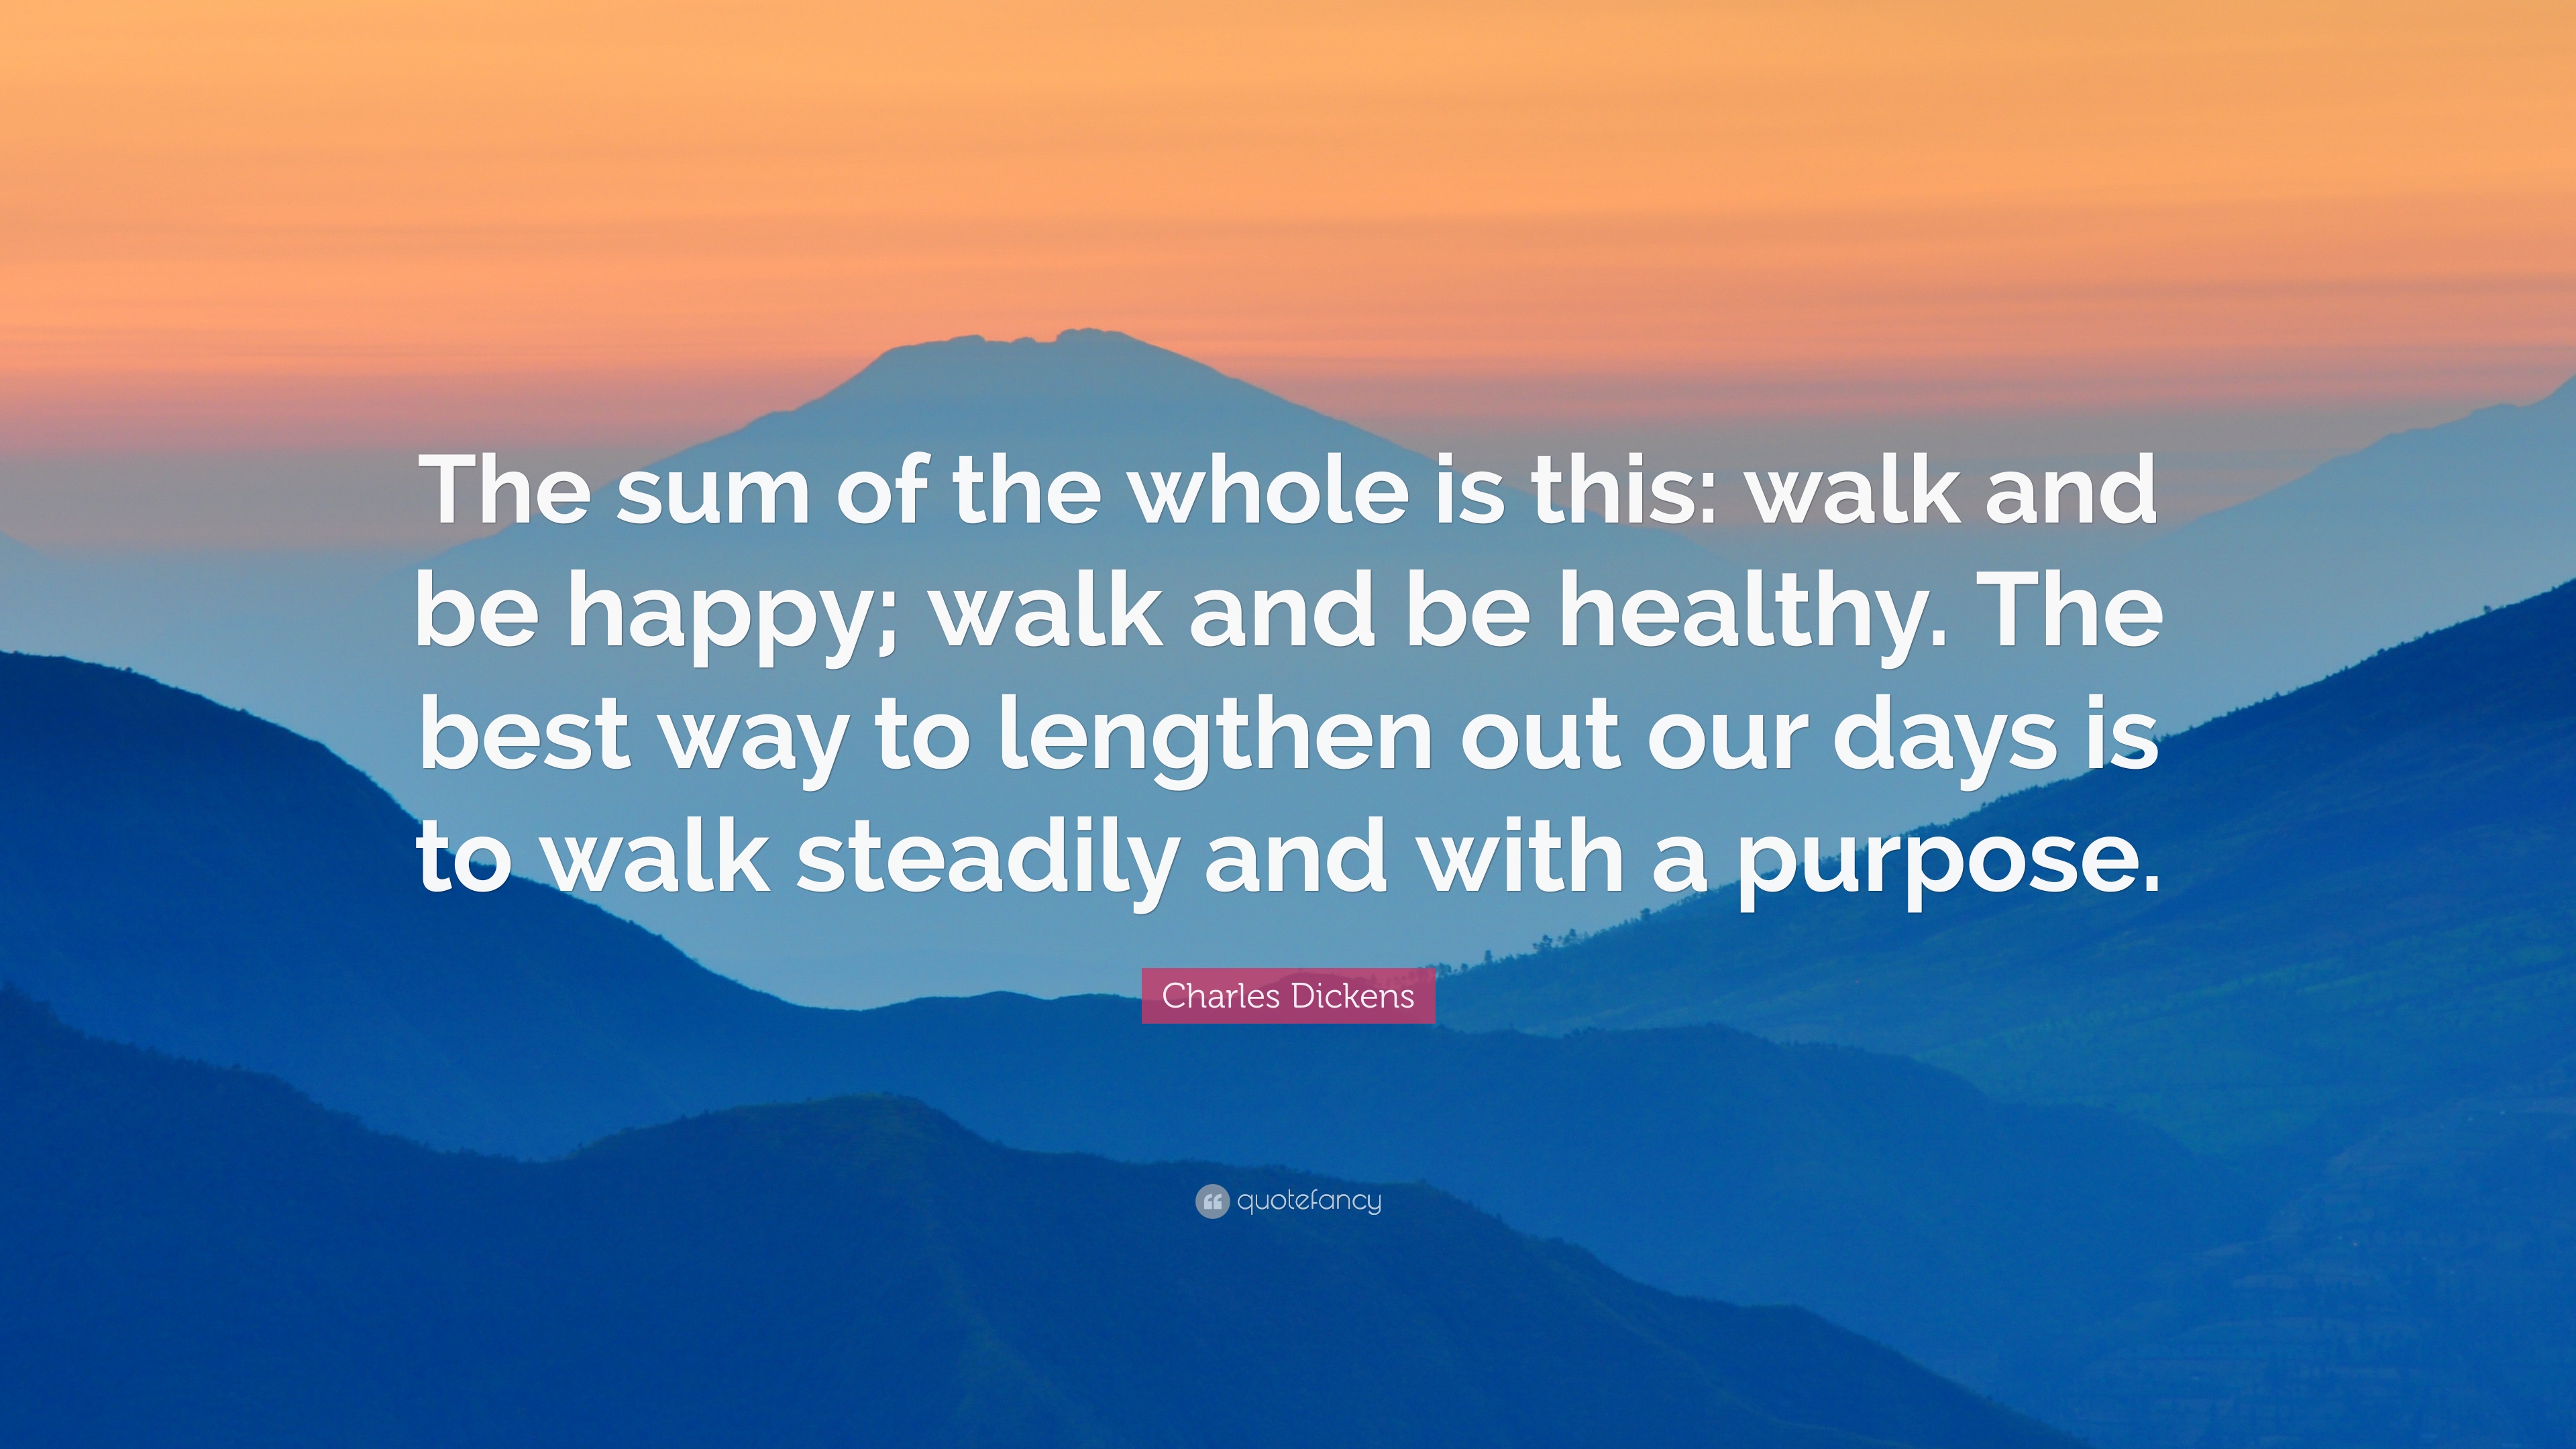 Charles Dickens Quote: “The sum of the whole is this: walk and be